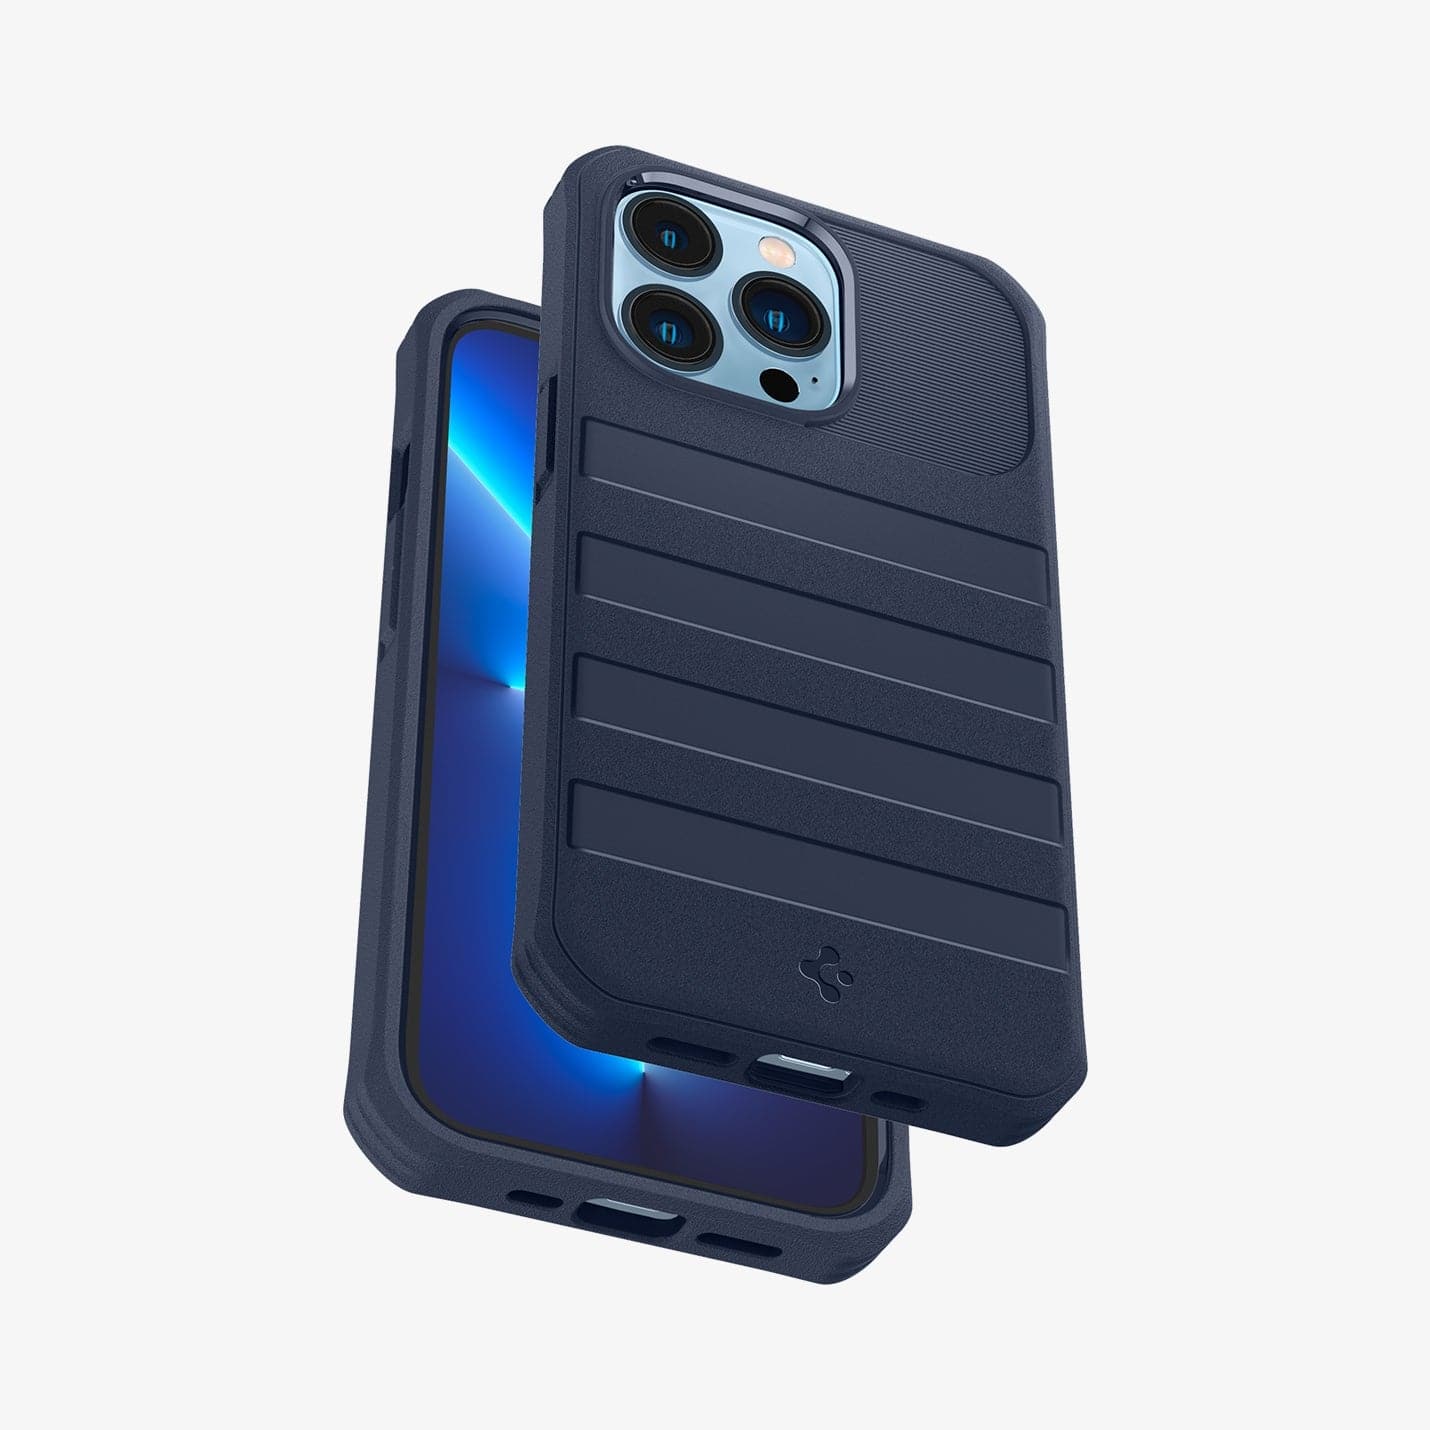 ACS03234 - iPhone 13 Pro Max Case Geo 360 in navy blue showing the back, front and bottom